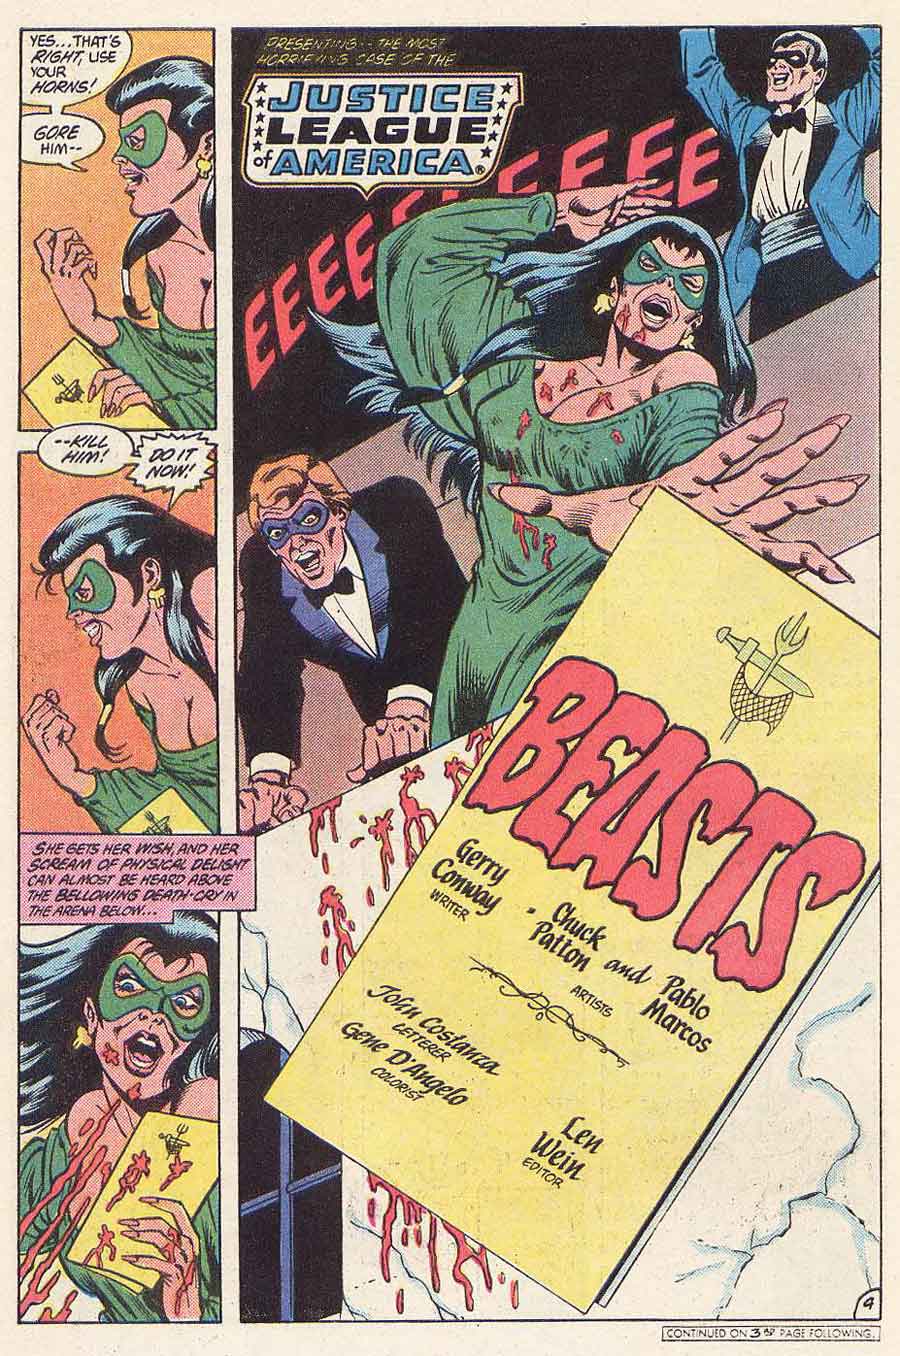 Justice League of America #221 by Gerry Conway, Chuck Patton and Pablo Marcos